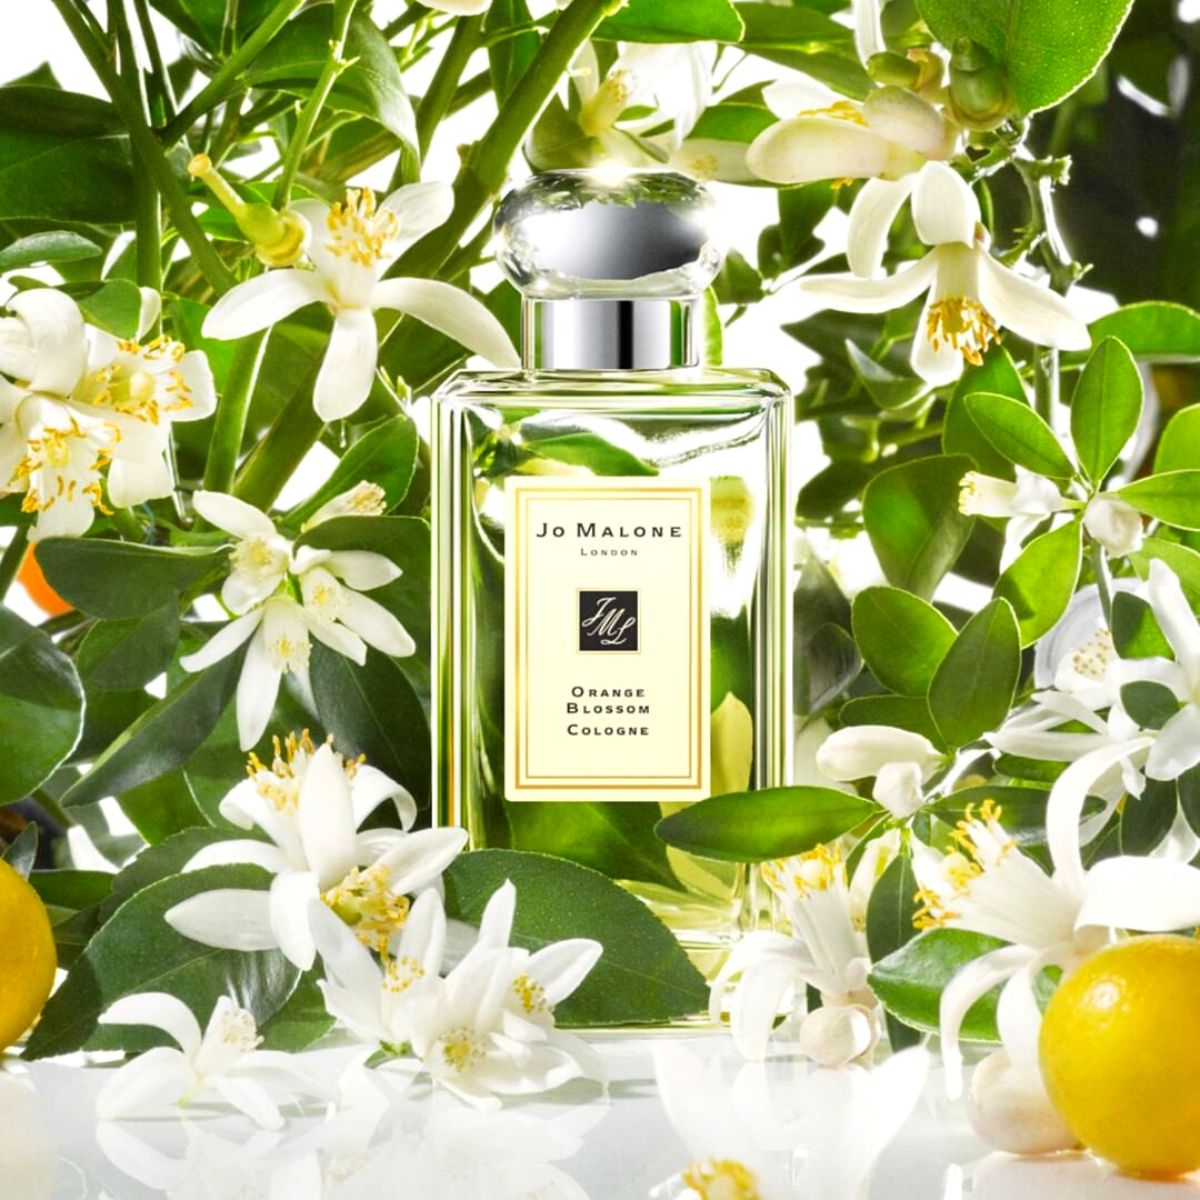 Natural floral perfumes by Jo Malone